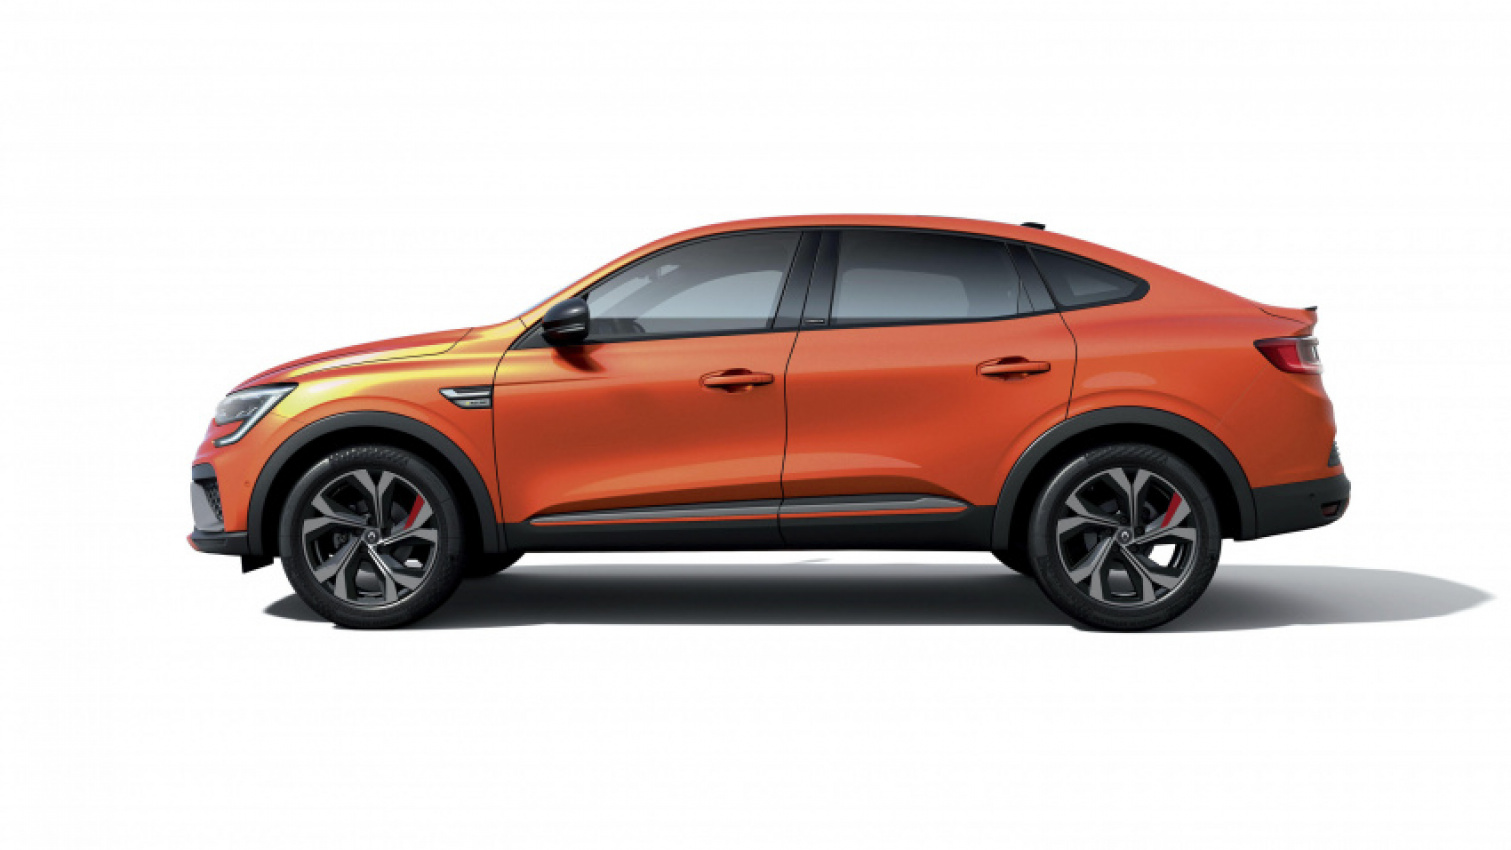 autos, cars, renault, android, android, all-new arkana coupe-suv set to bolster renault’s model range in uk